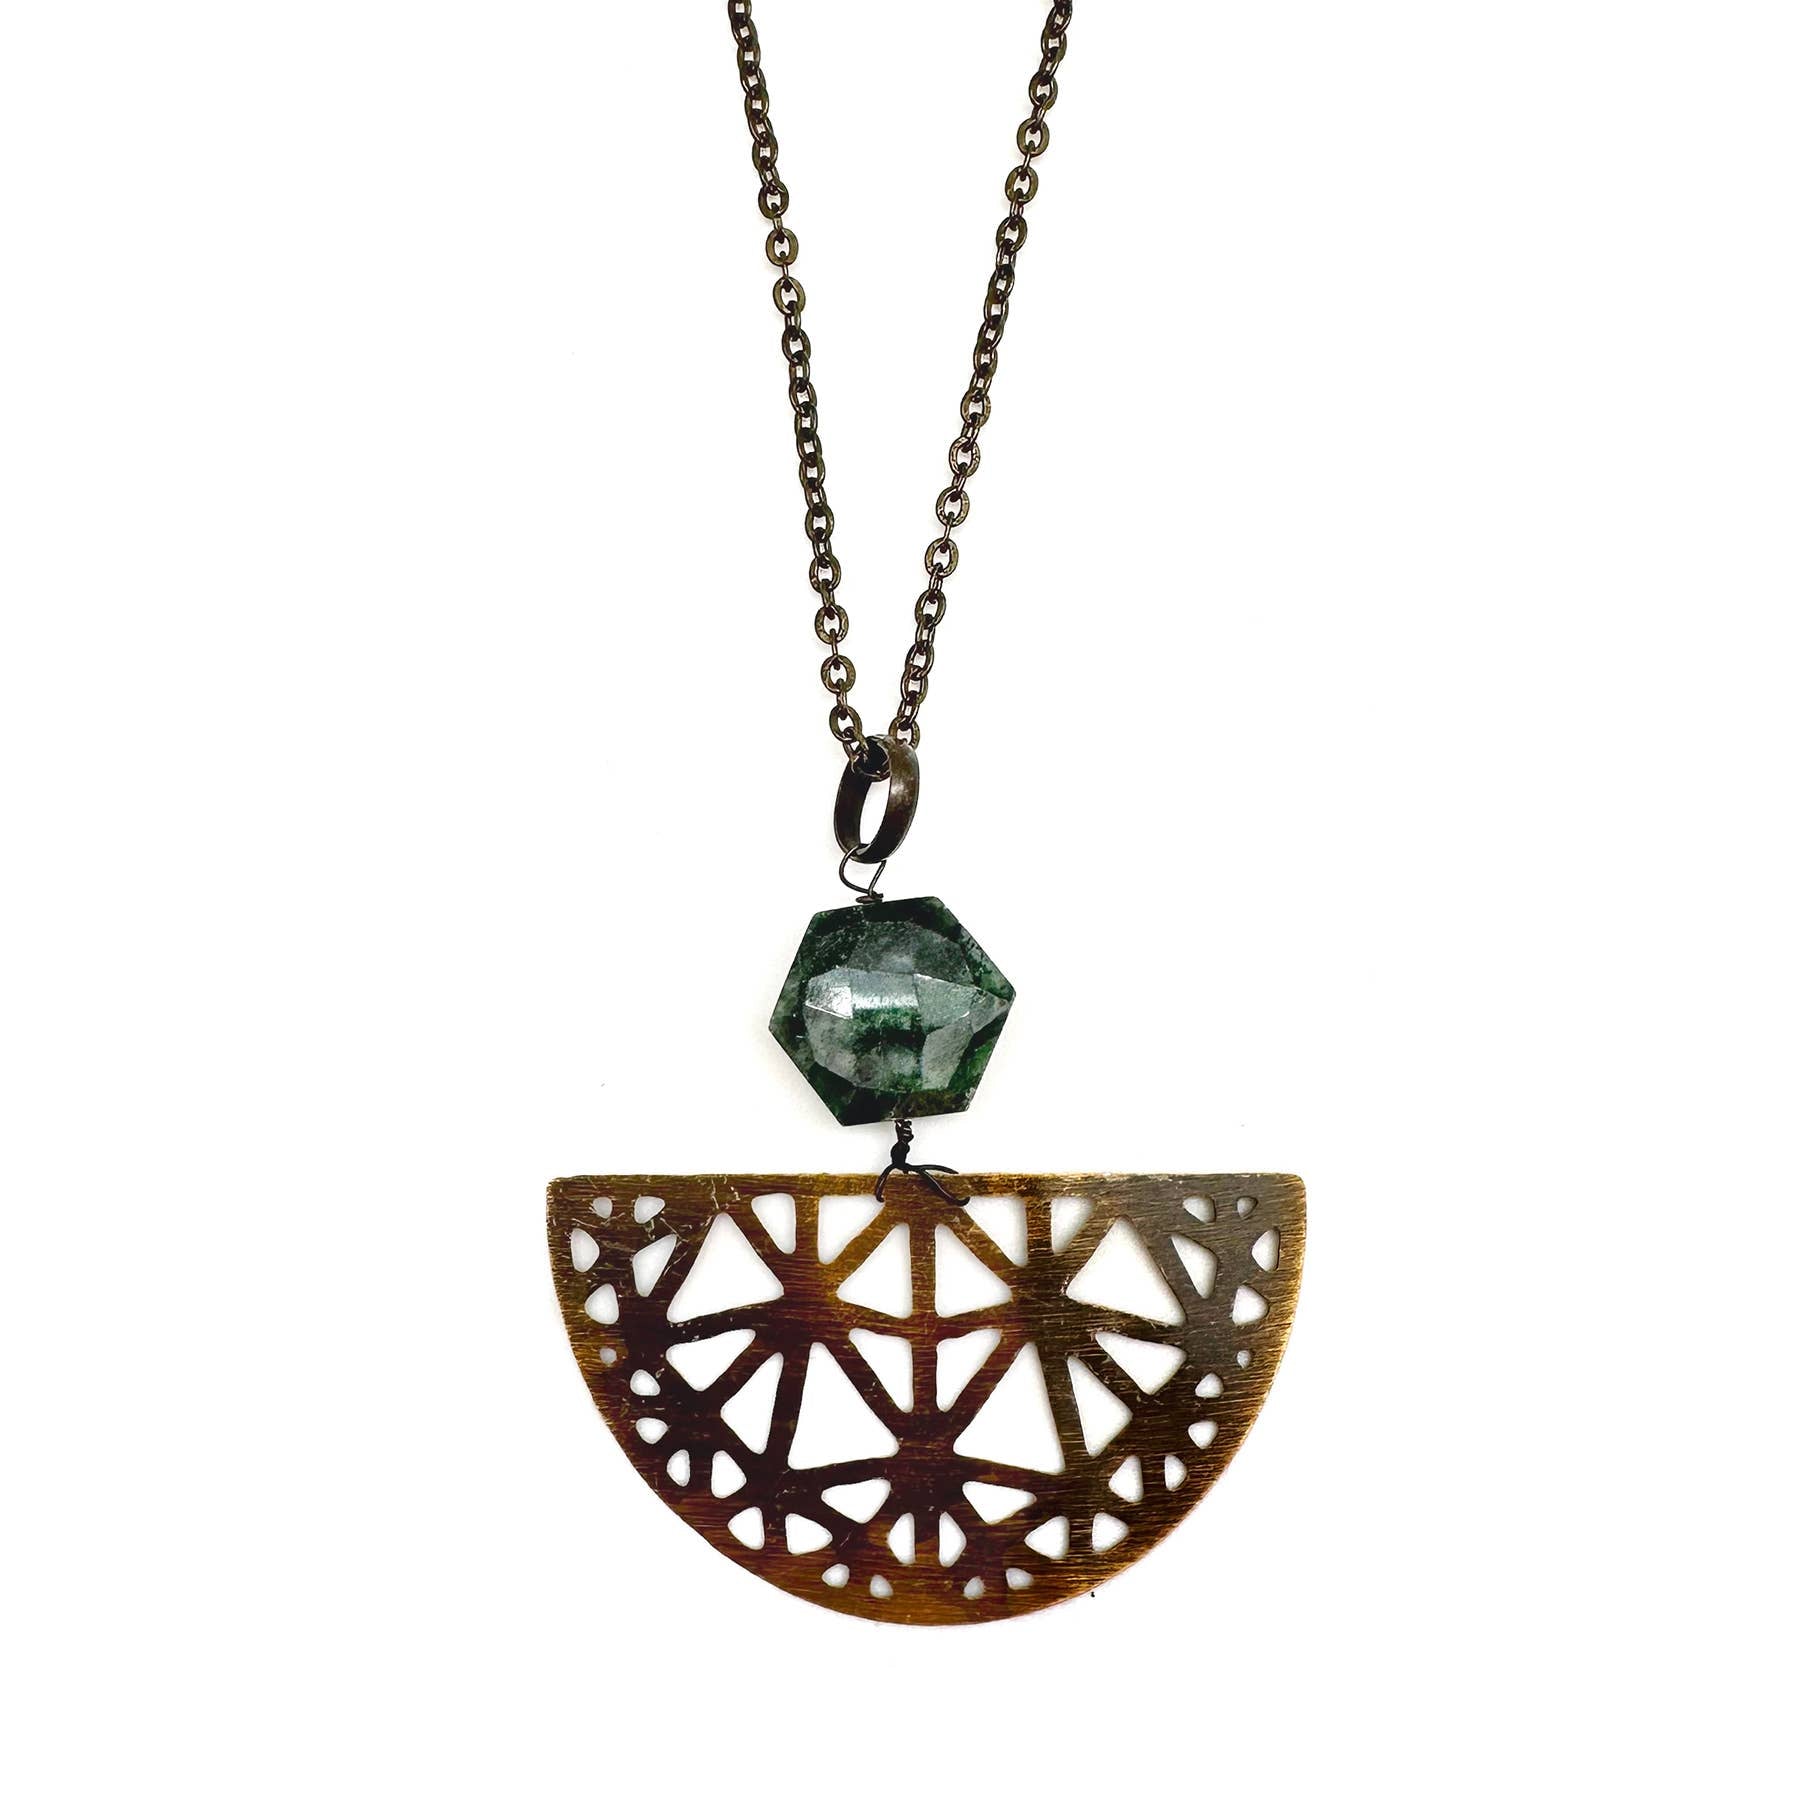 Banjara Collection Necklace - Ruby Zoisite, Brass Filigree